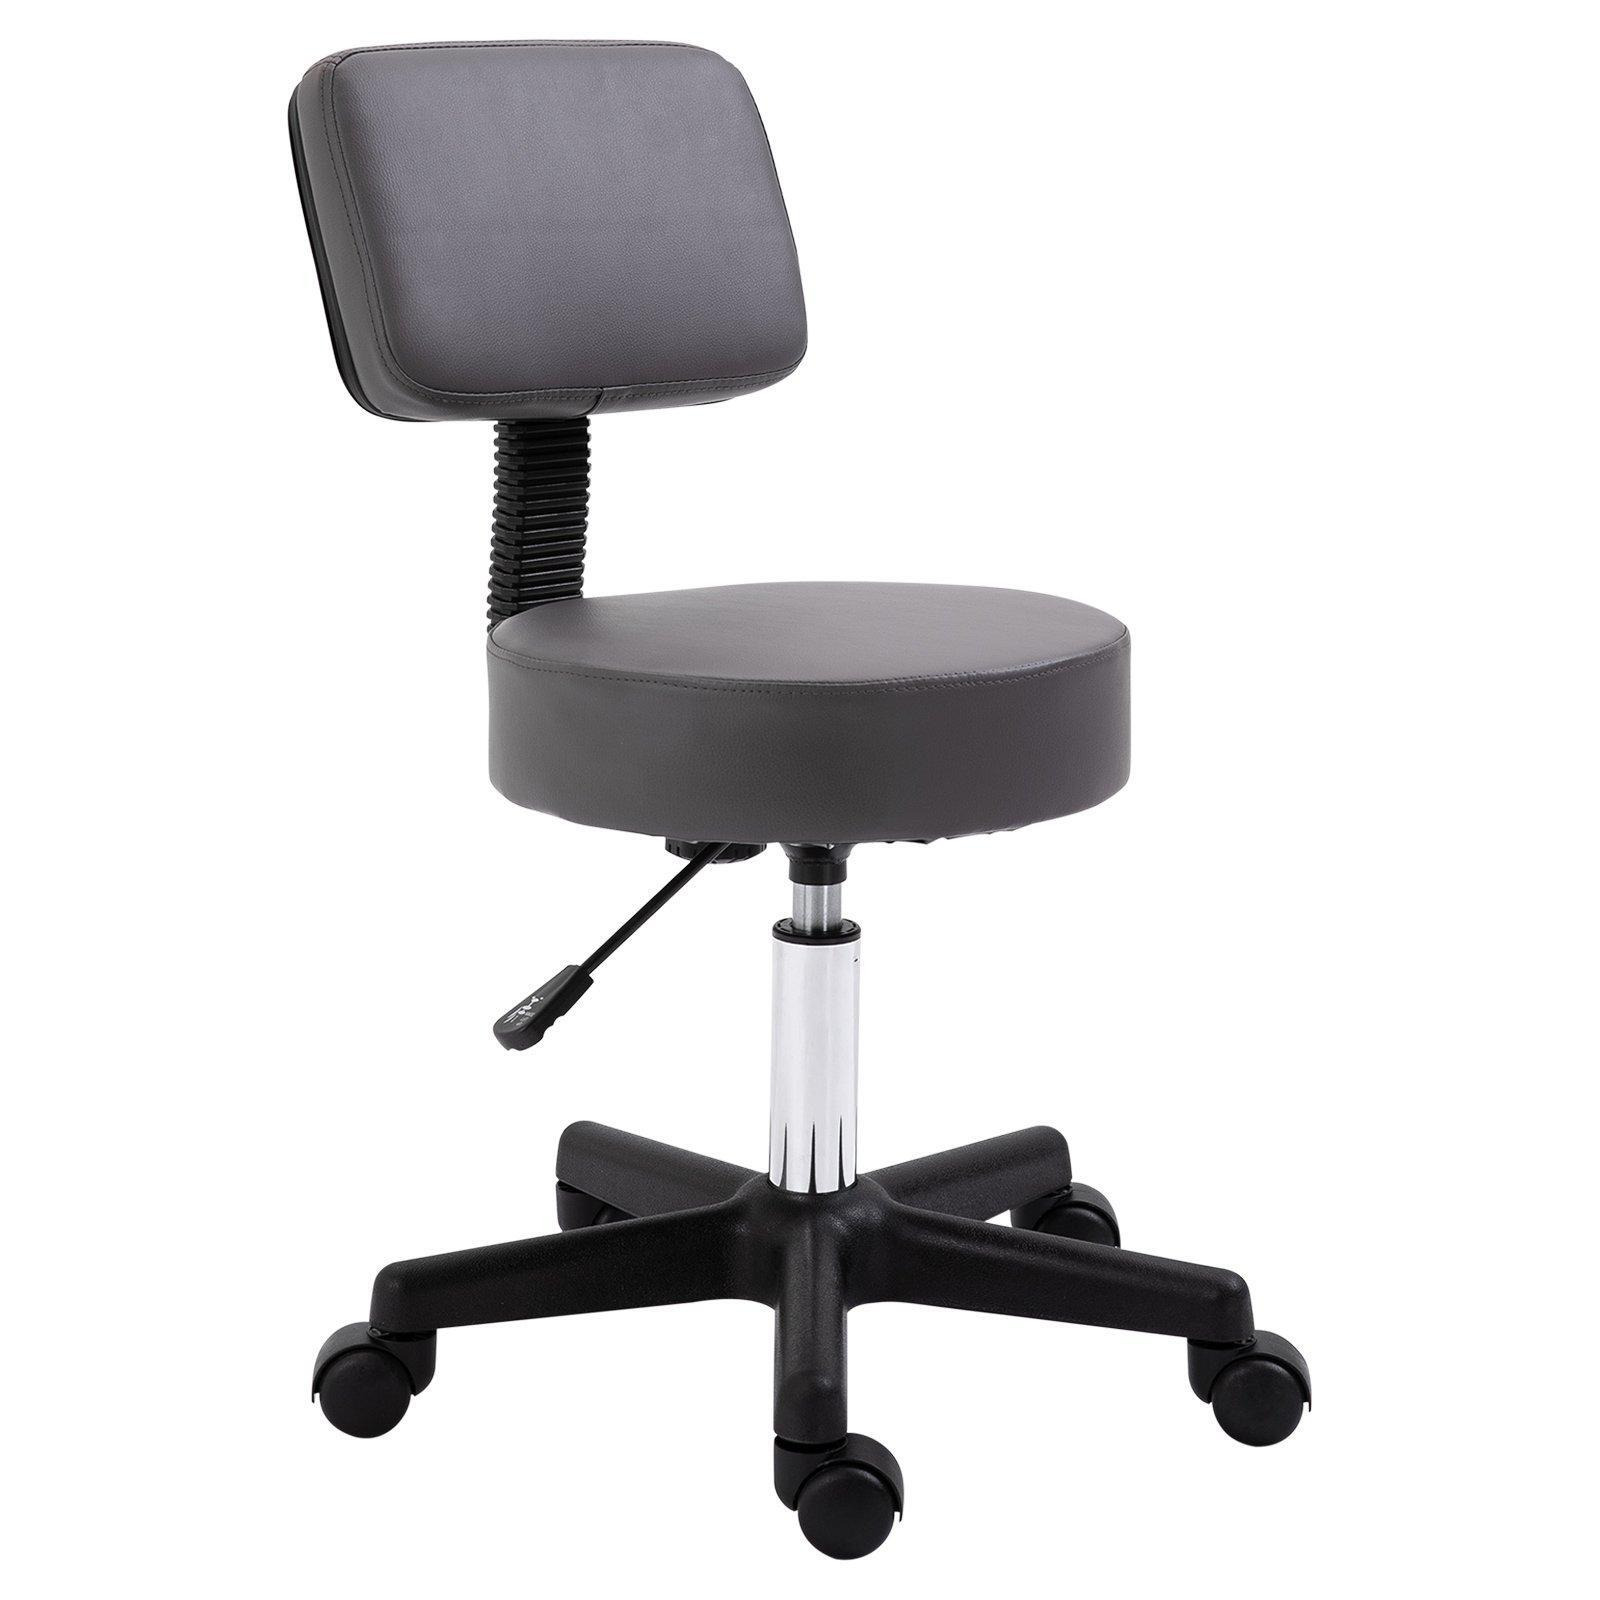 Beautician's Adjustable Swivel Salon Chair and Padded Seat Back - image 1